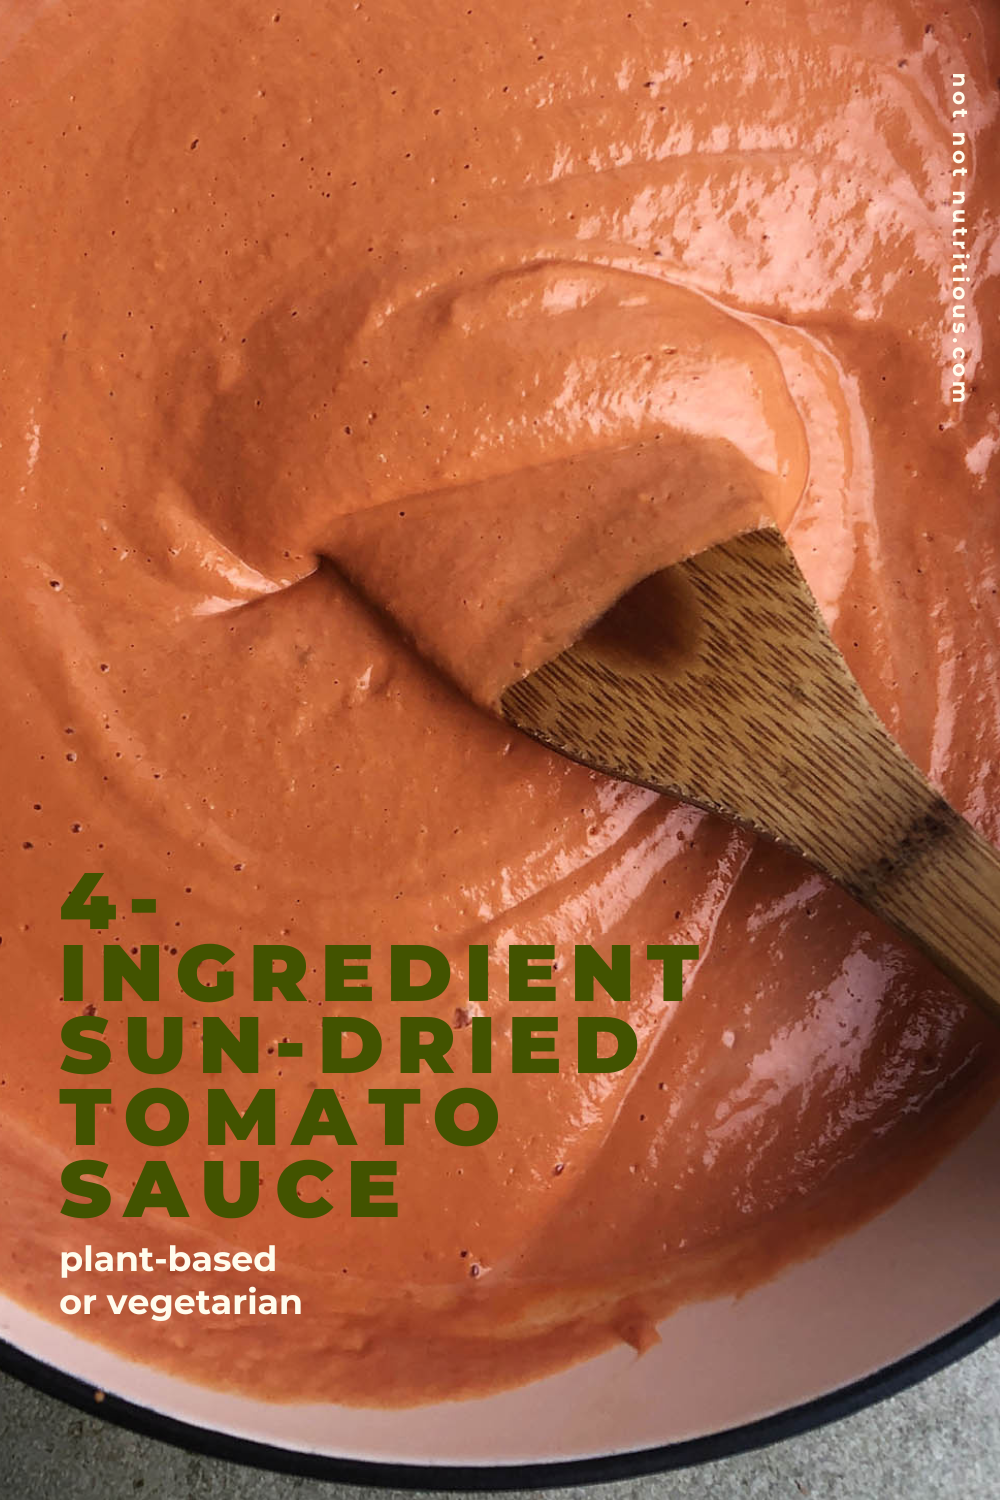 Pin for 4-ingredients sun-dried tomato sauce